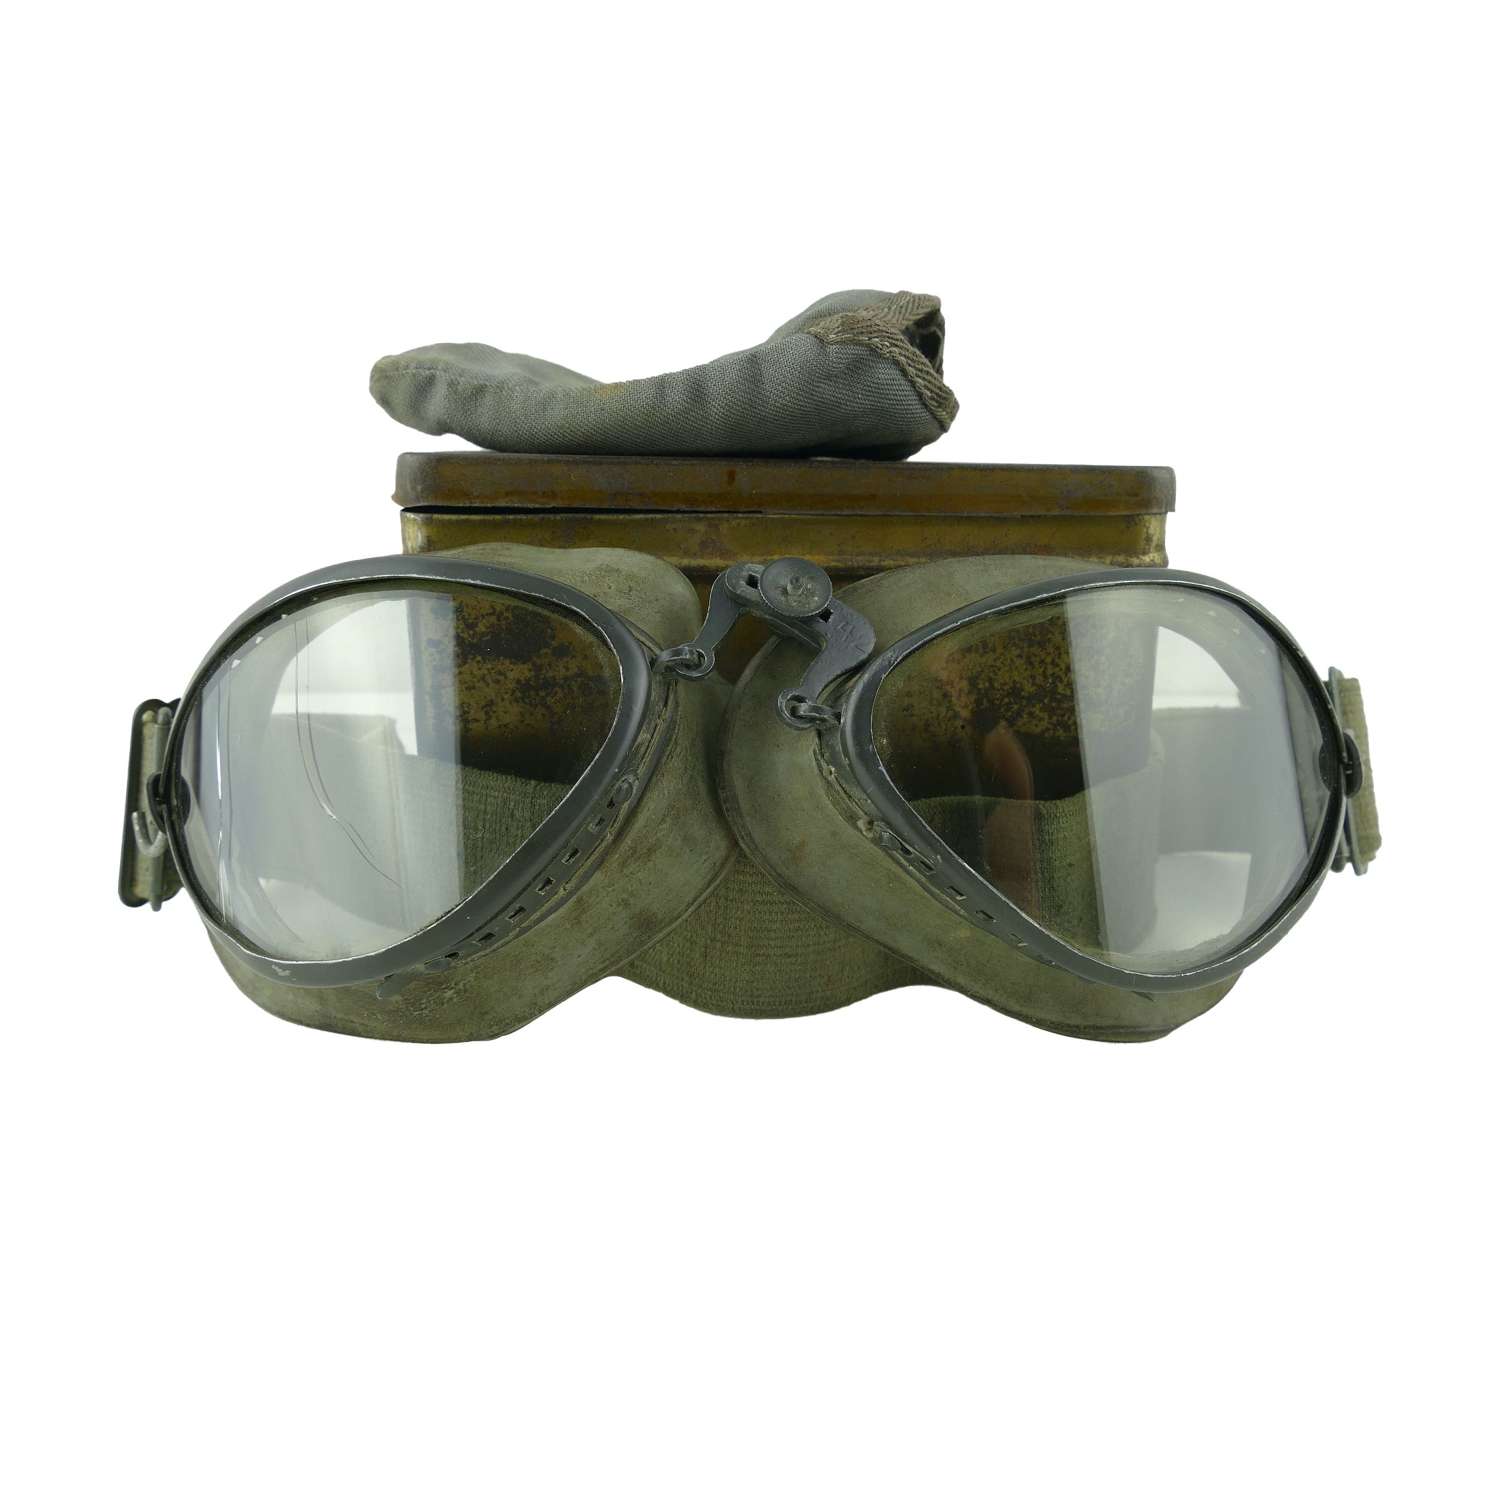 Luftwaffe 'used' general purpose goggles, cased